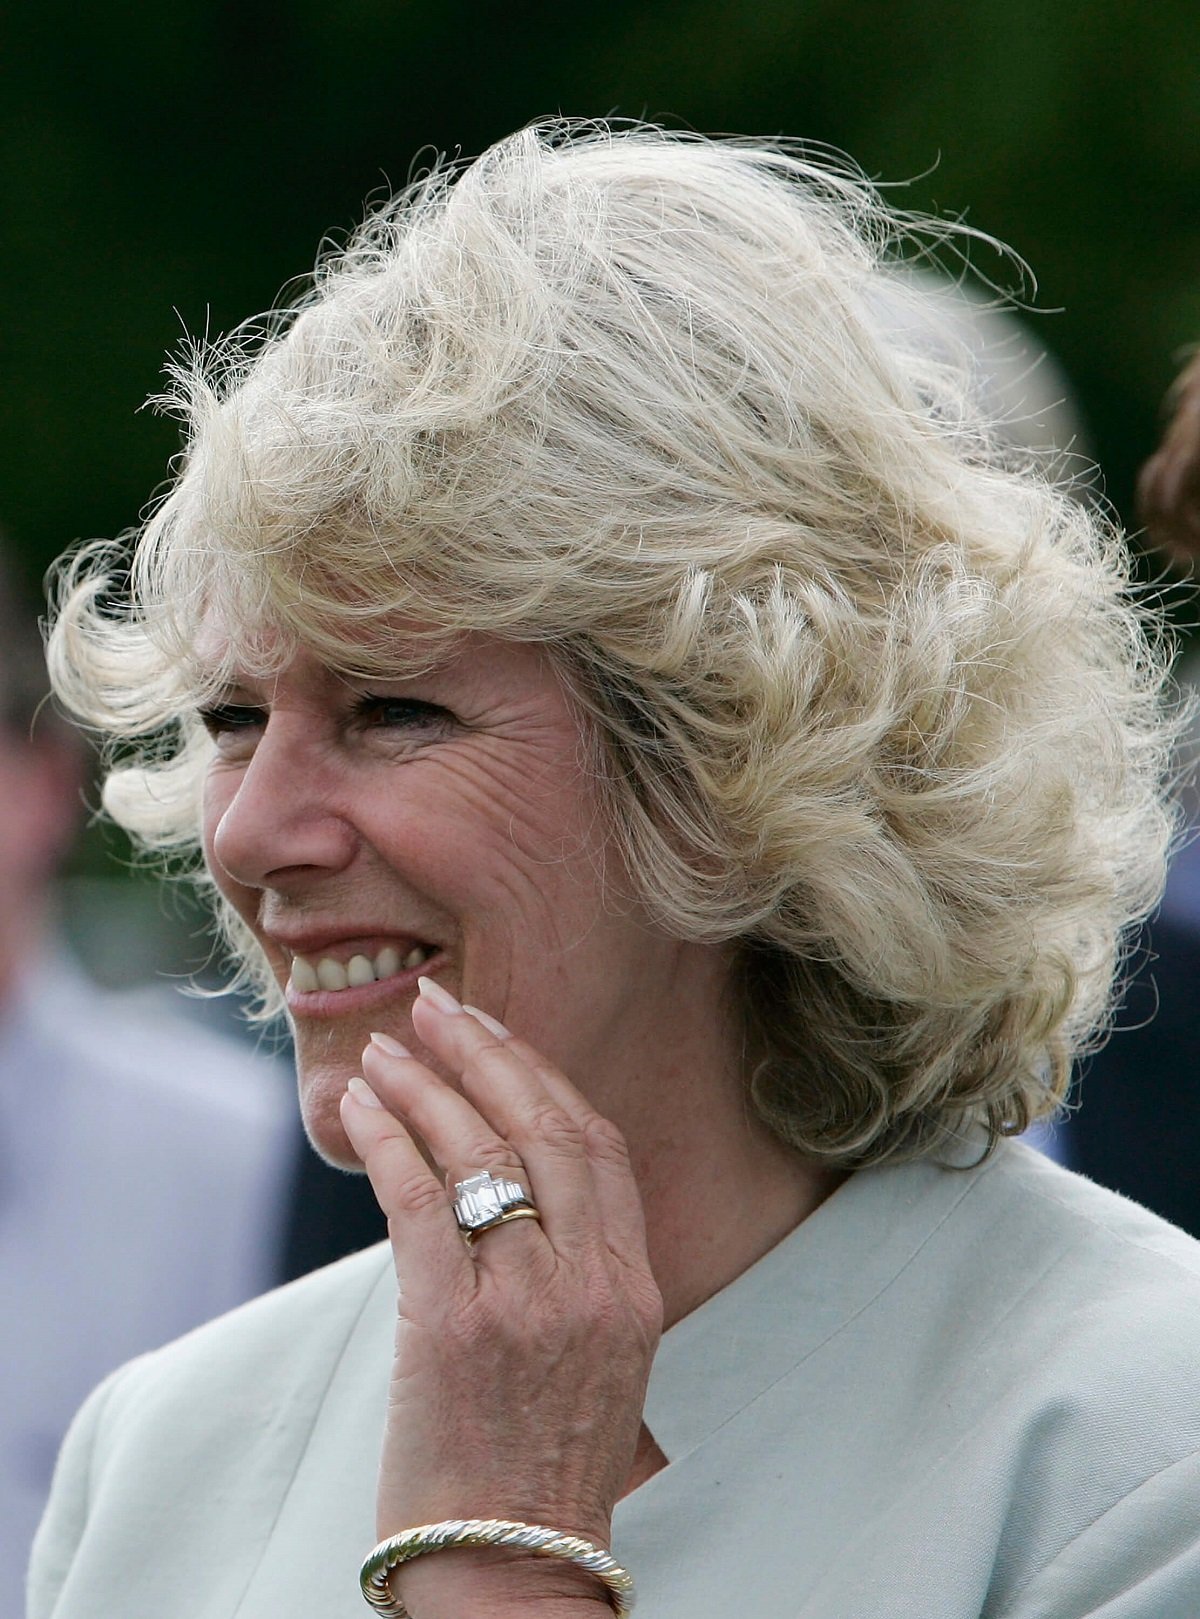 Camilla Parker Bowles' engagement ring is seen on her finger at a polo match in Cirencester, England